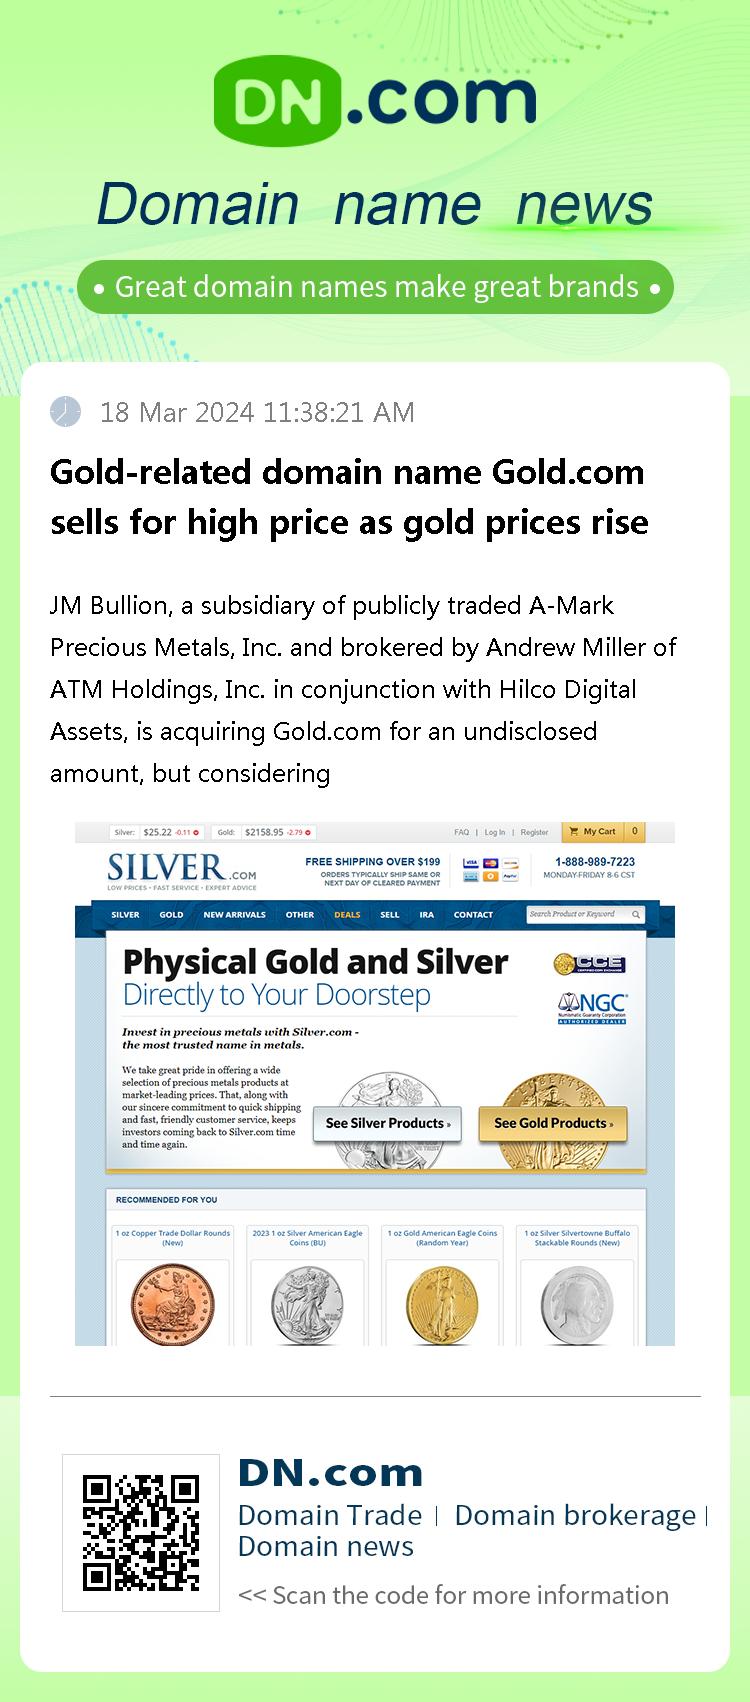 Gold-related domain name Gold.com sells for high price as gold prices rise